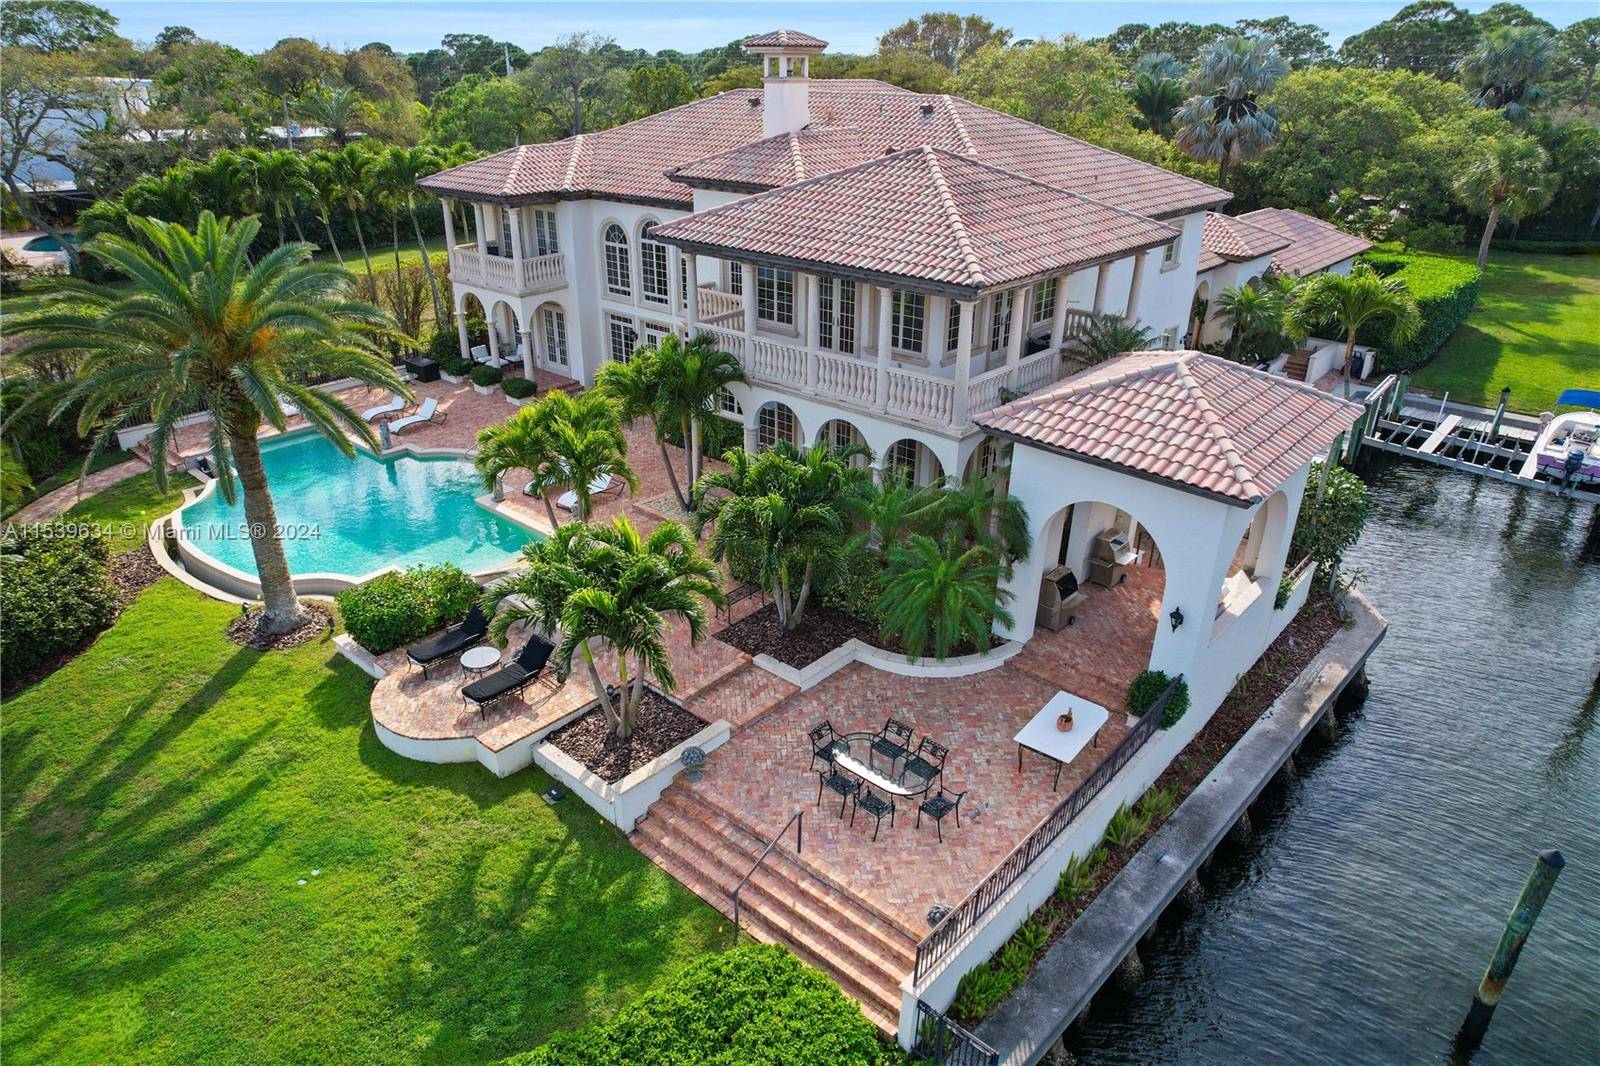 This real estate offering presents an exceptional opportunity to own a waterfront estate with over 2 acres of land and 300 feet of direct Intracoastal waterfront.